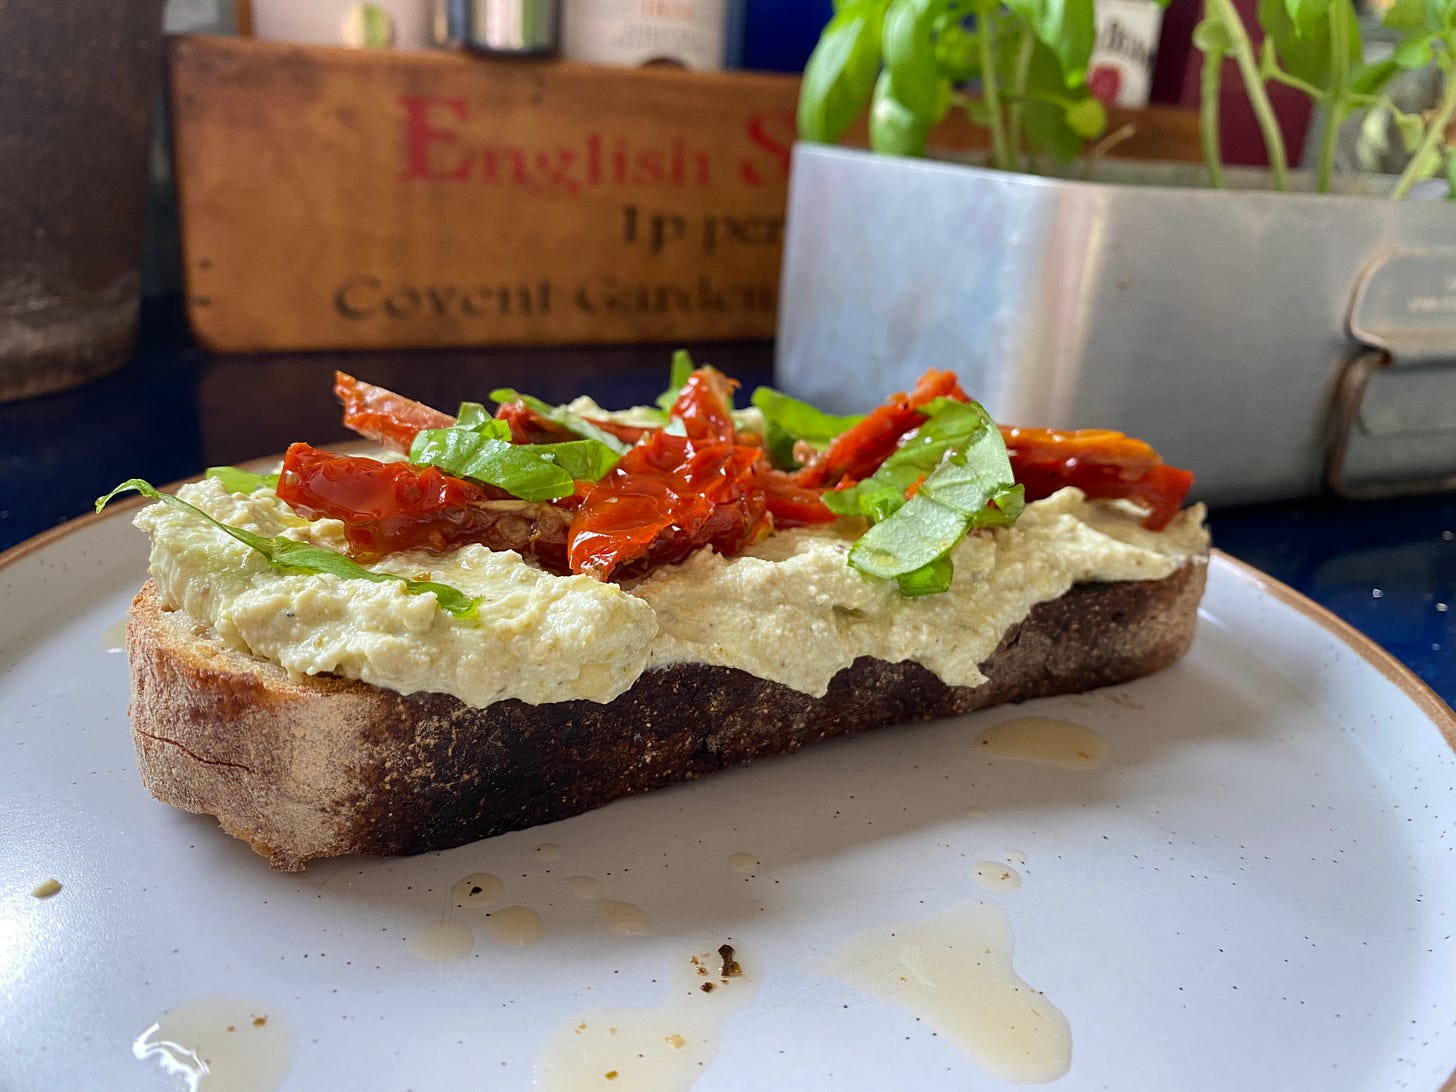 Slice of toast topped with cream cheese and sliced red sun-dried tomatoes and torn basil leaves. A silver container with basil plants is placed behind the plate on the worktop.